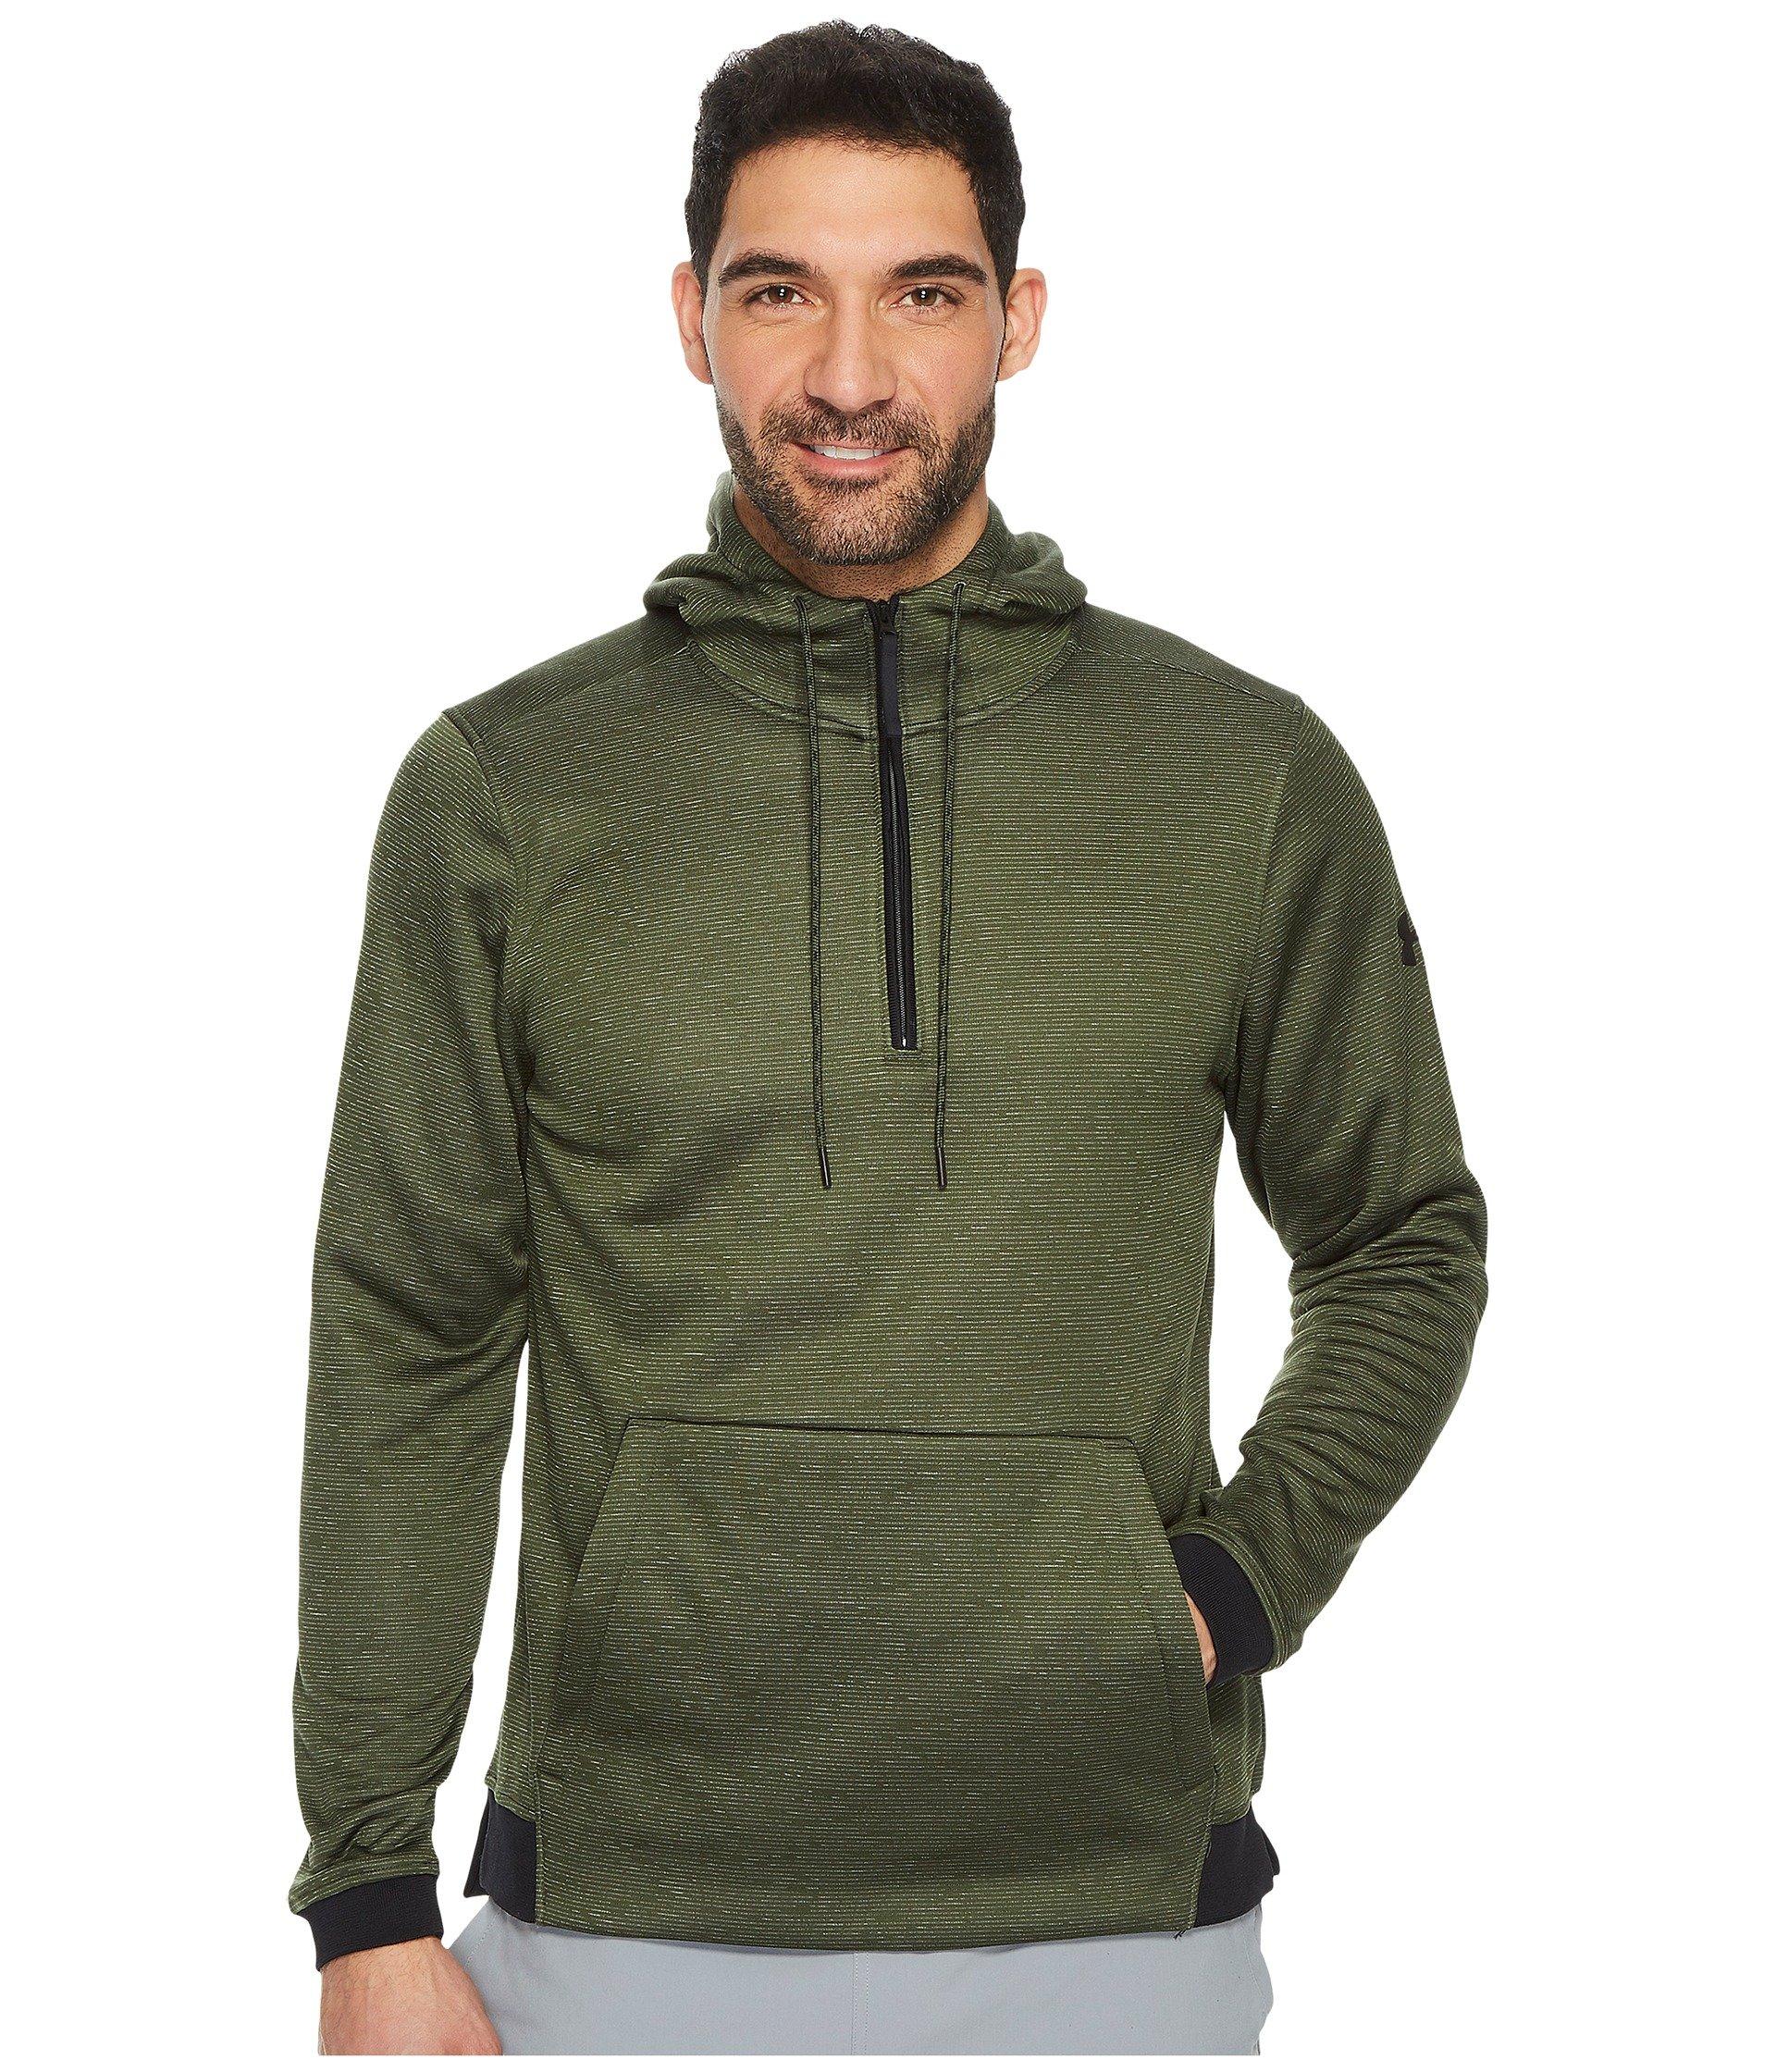 green and black under armour hoodie